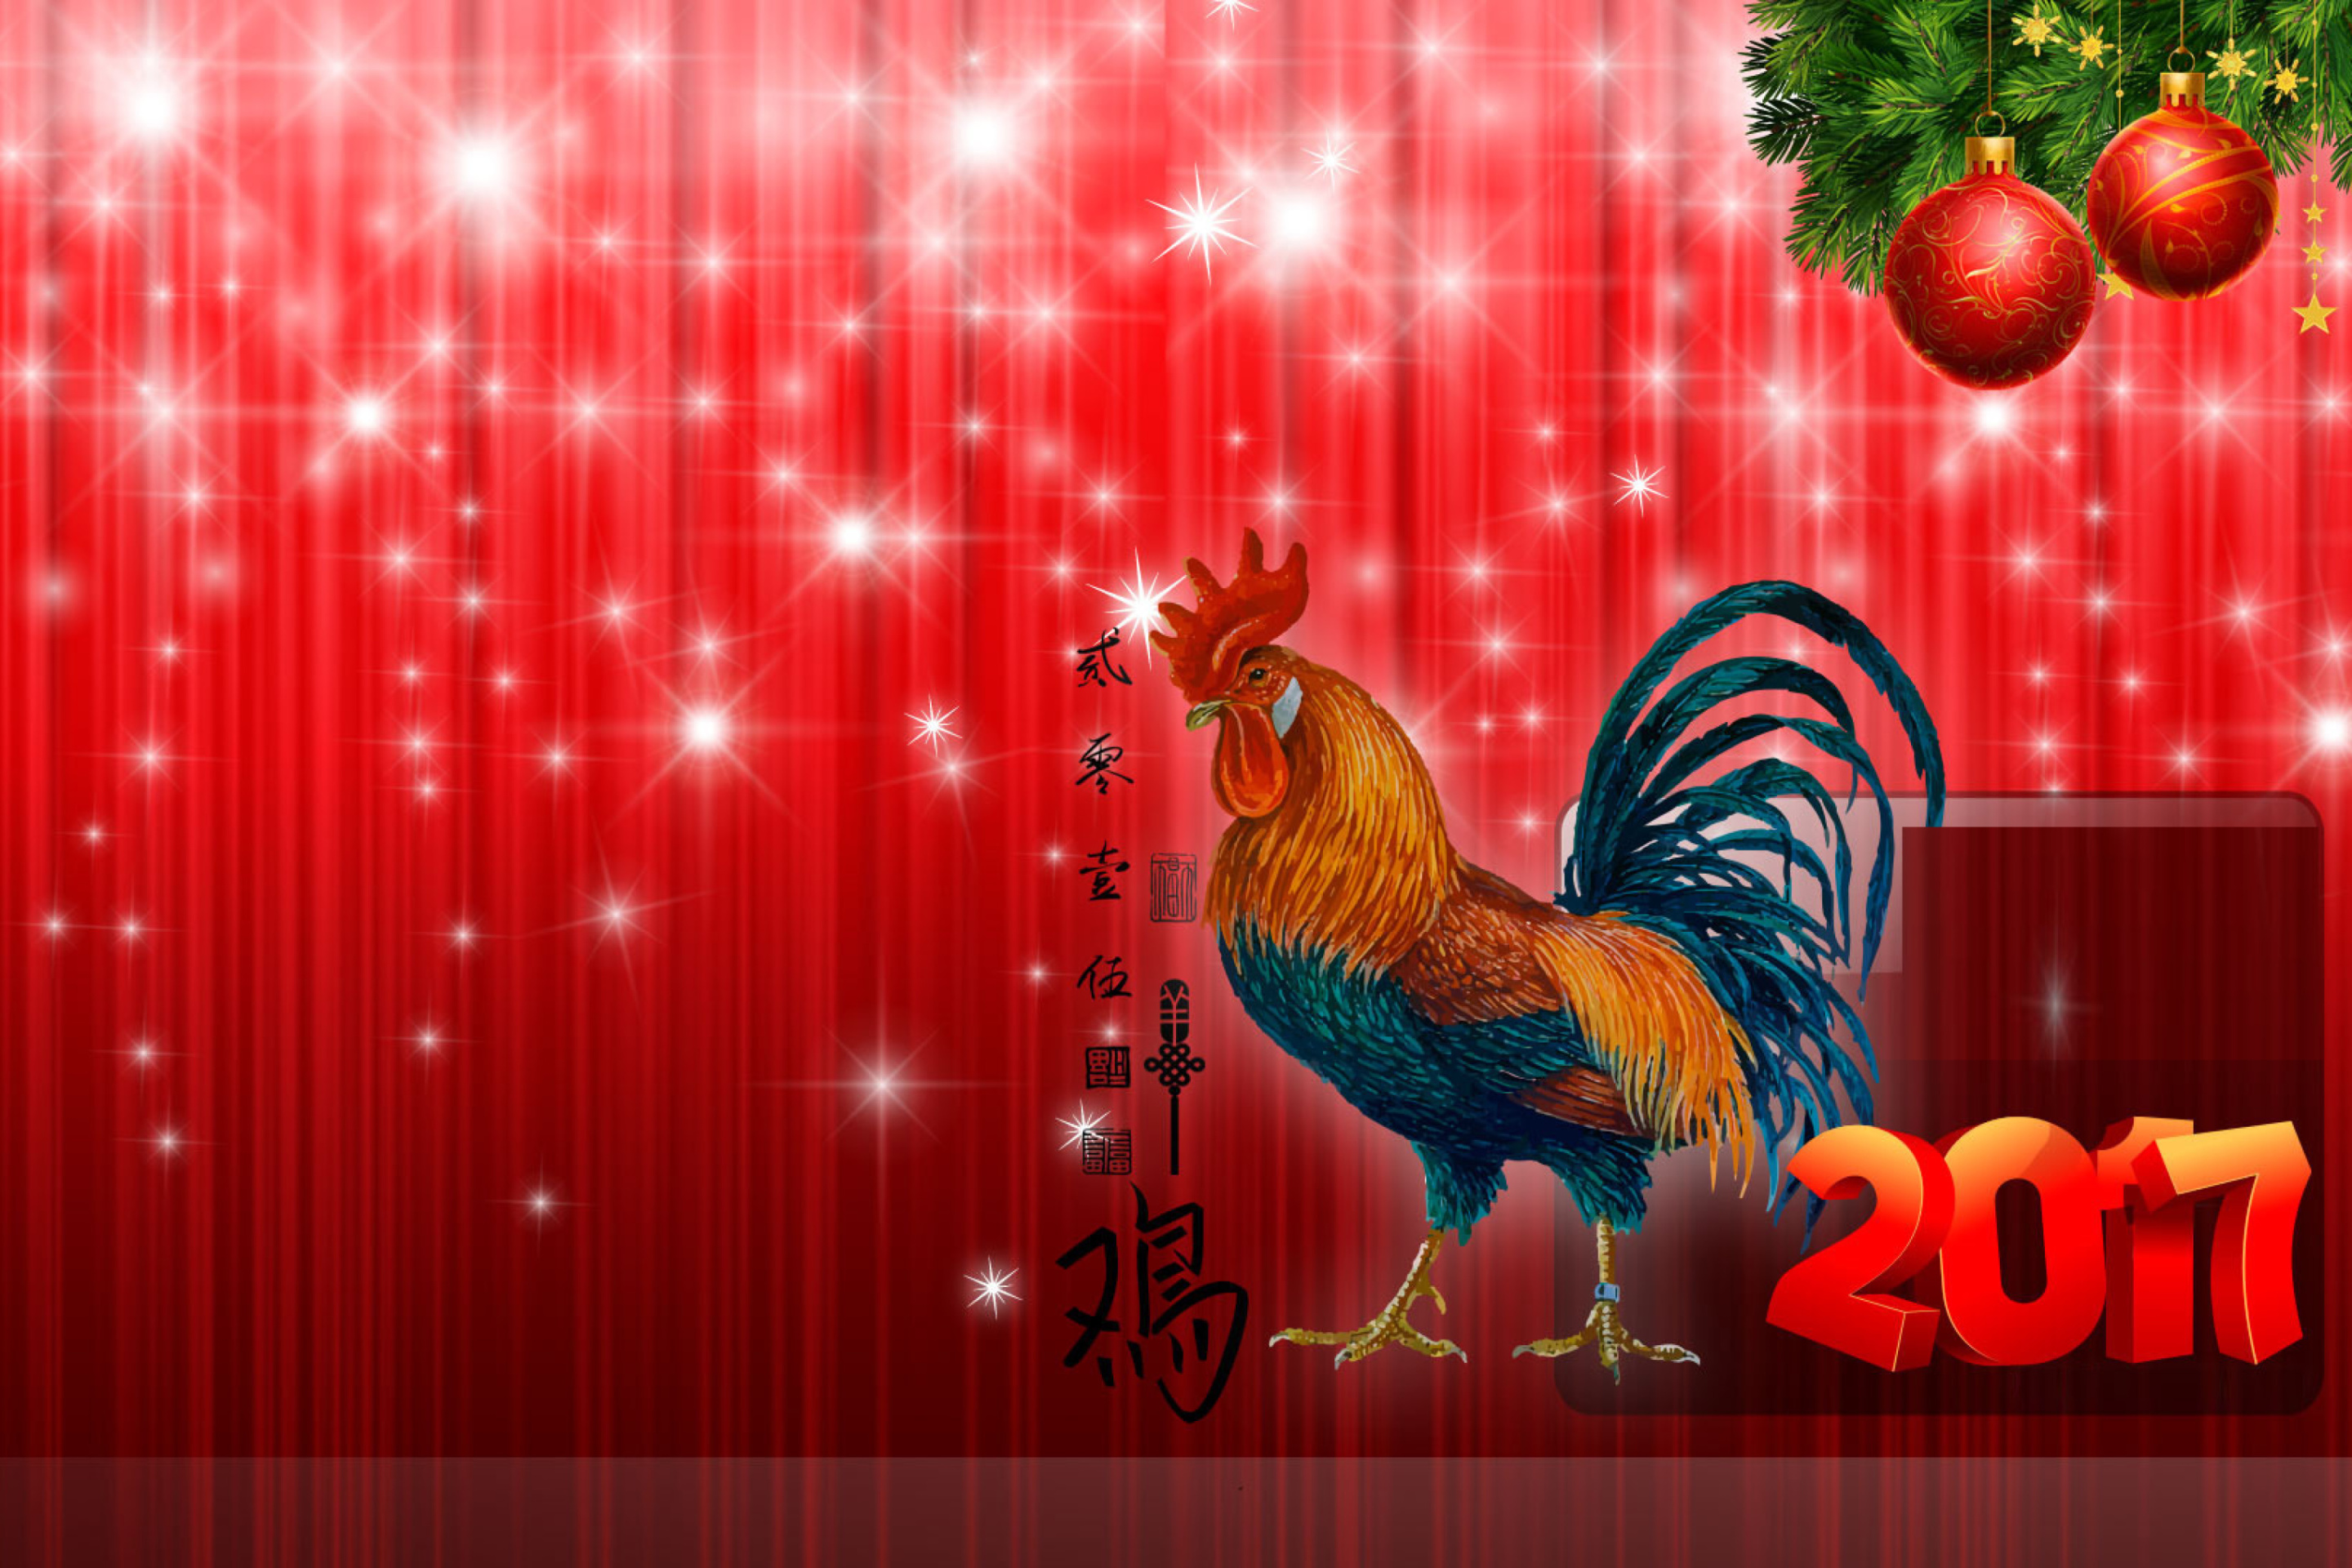 Das 2017 New Year Red Cock Rooster Wallpaper 2880x1920